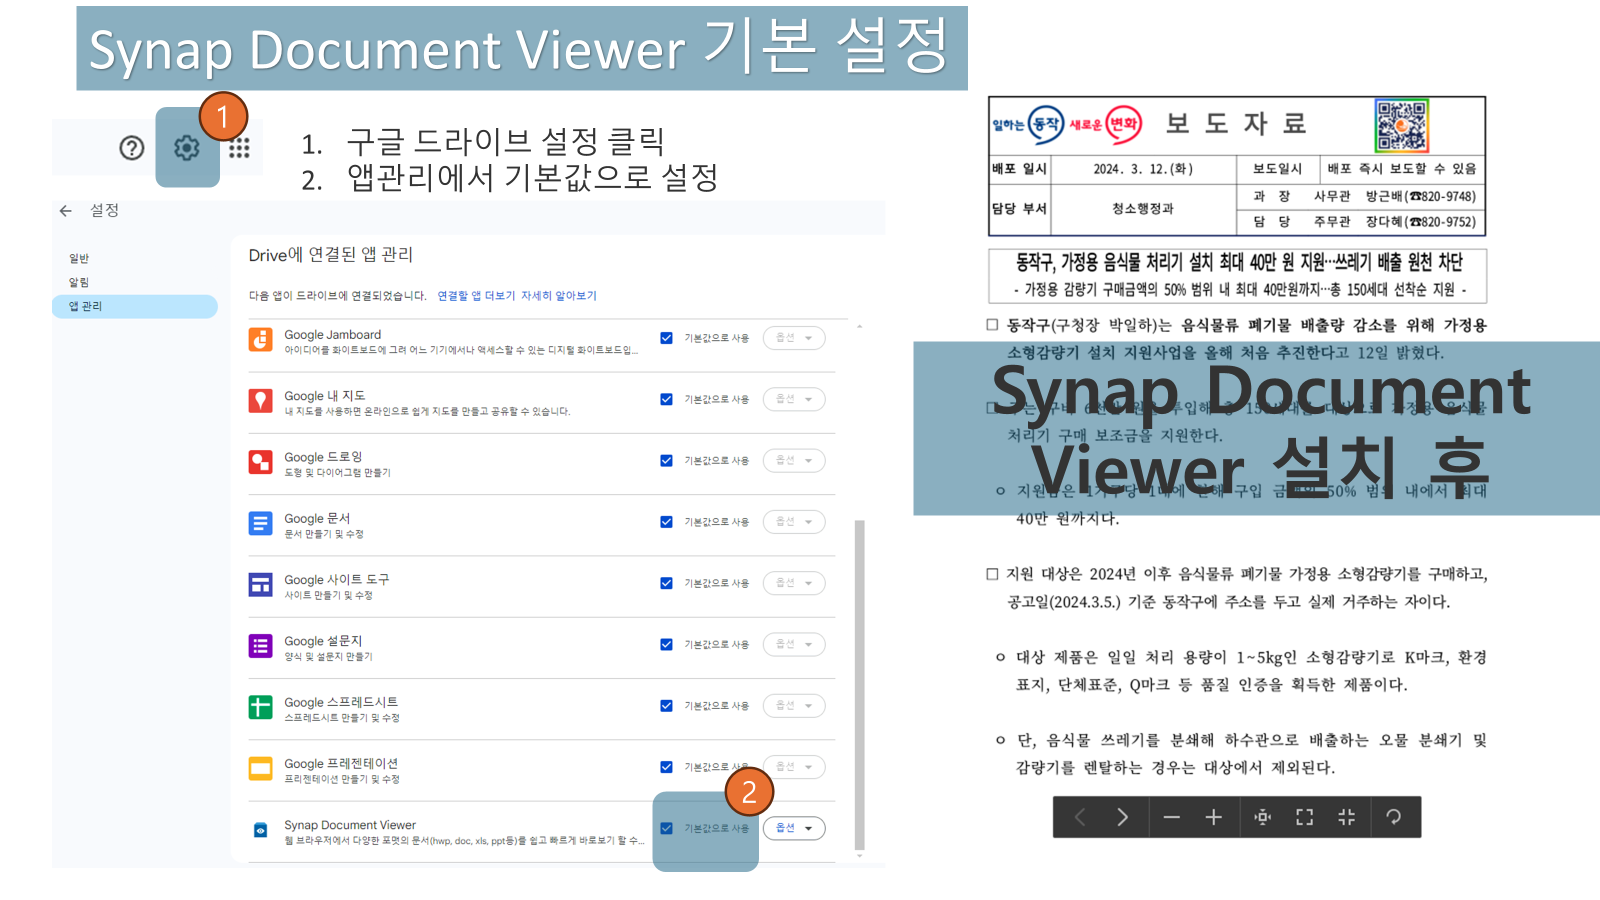 Synap Document Viewer 설치 후 모습